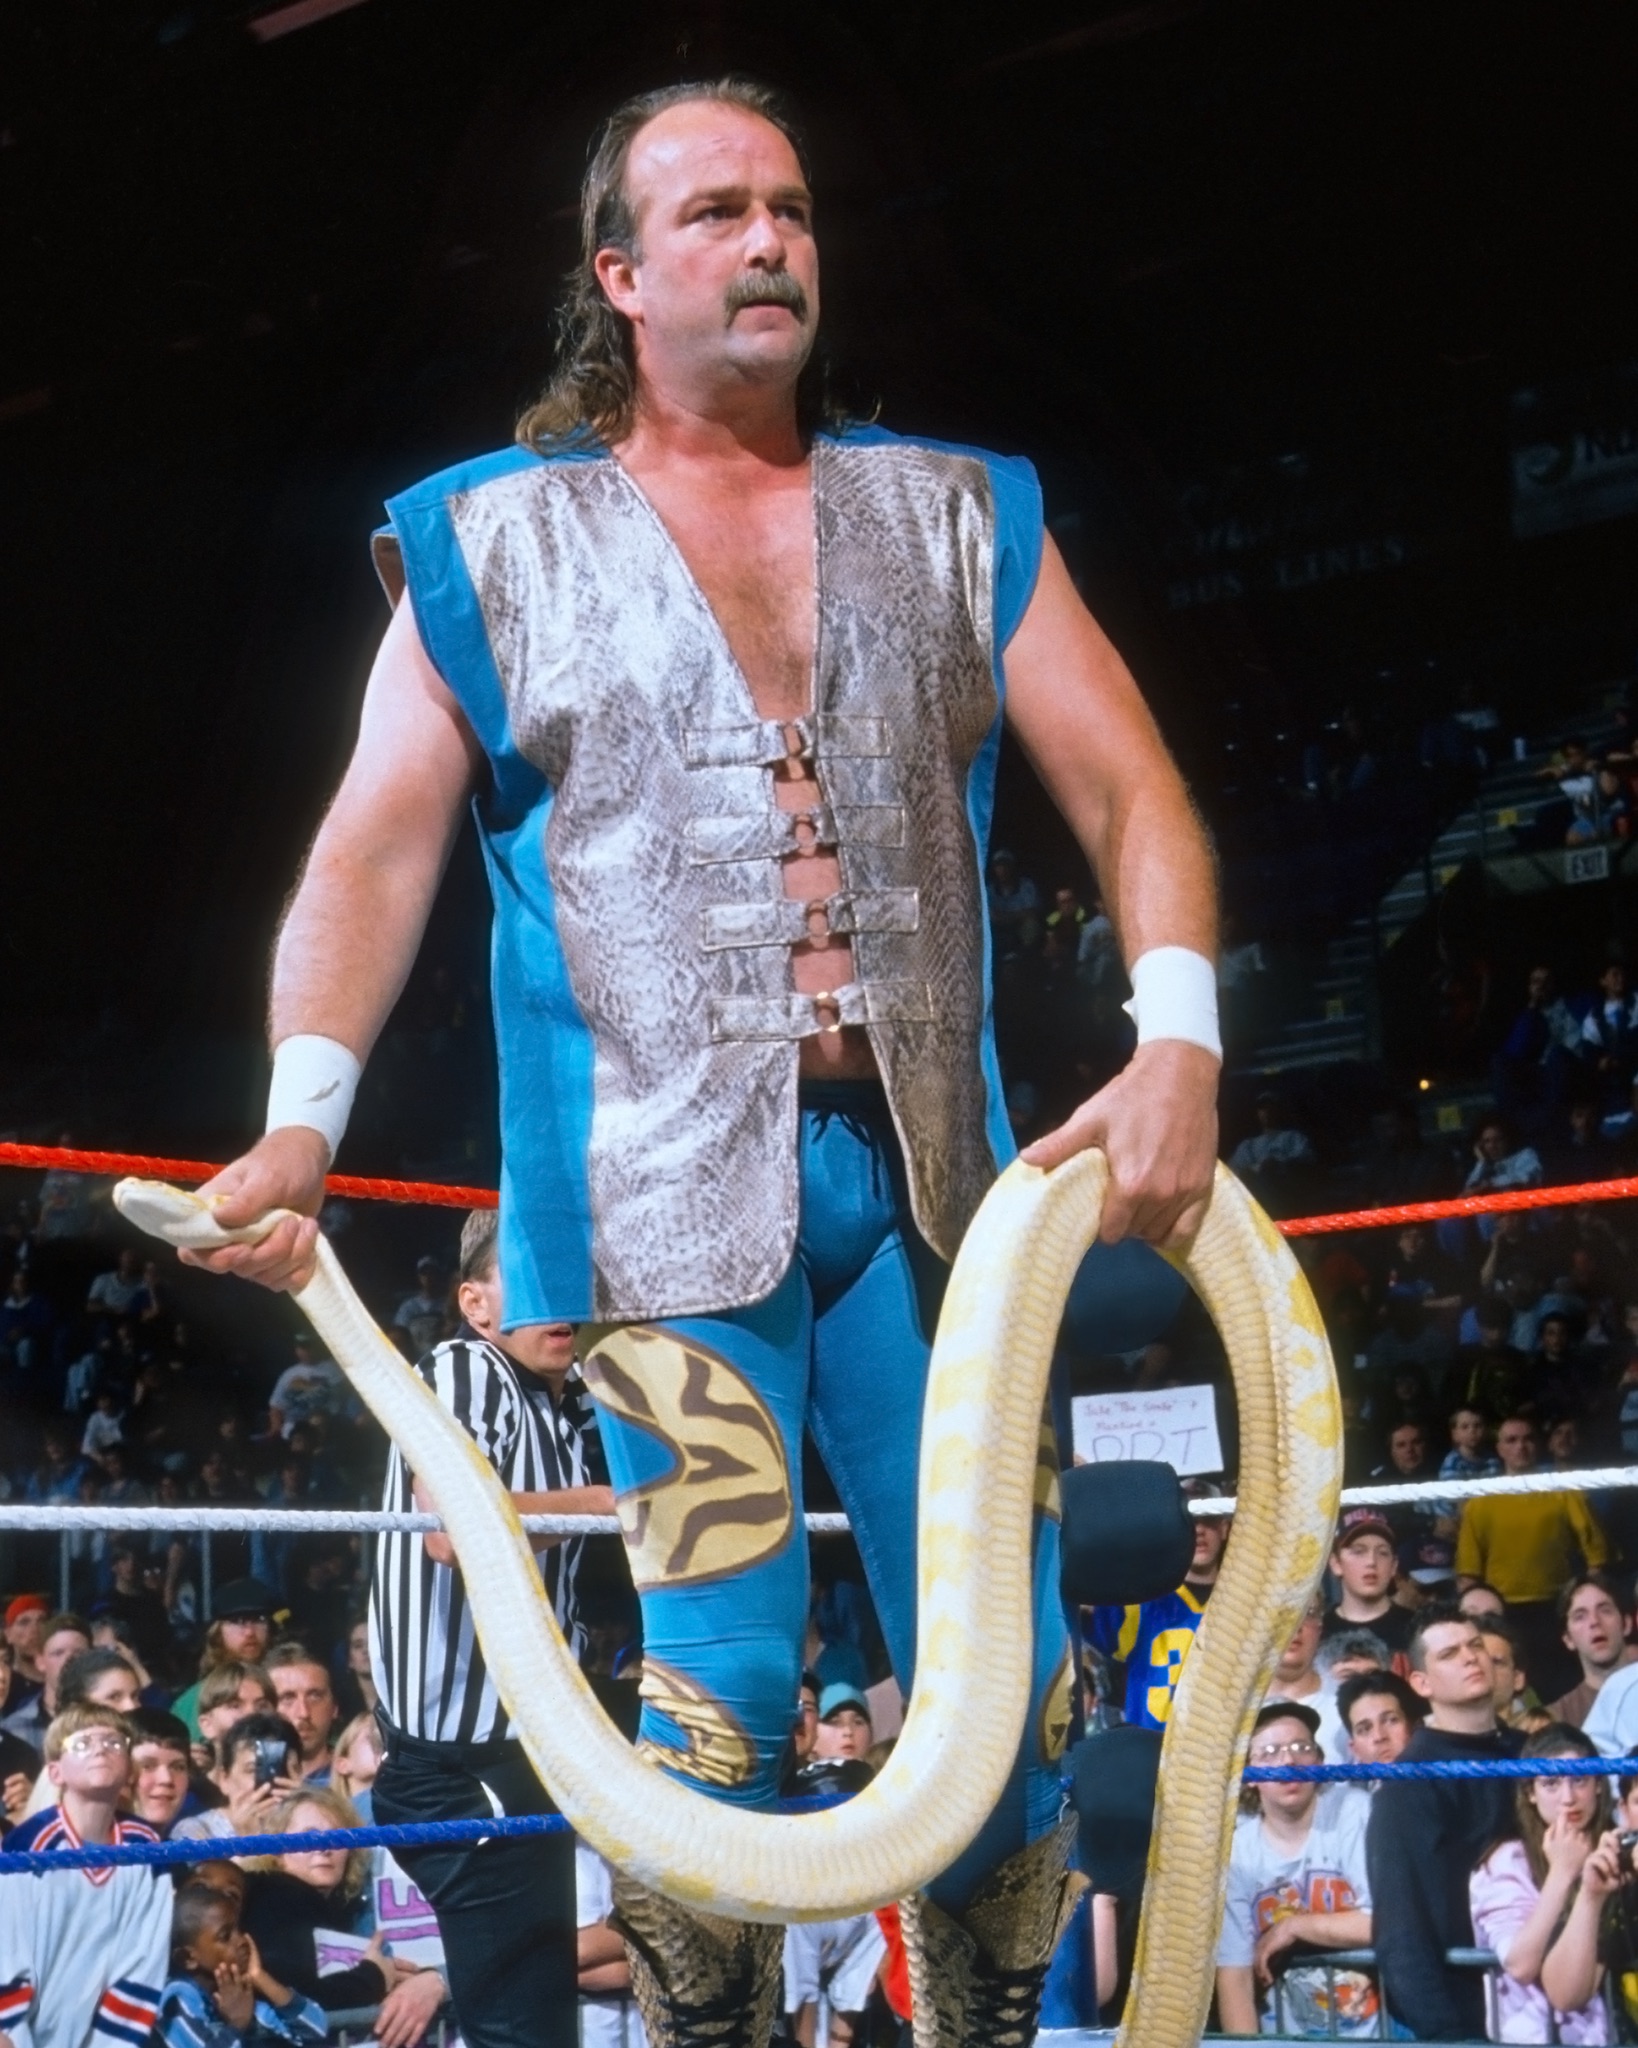 WWE legend Jake 'The Snake' Roberts opens up on drink and drugs hell which left him suicidal. The US Sun